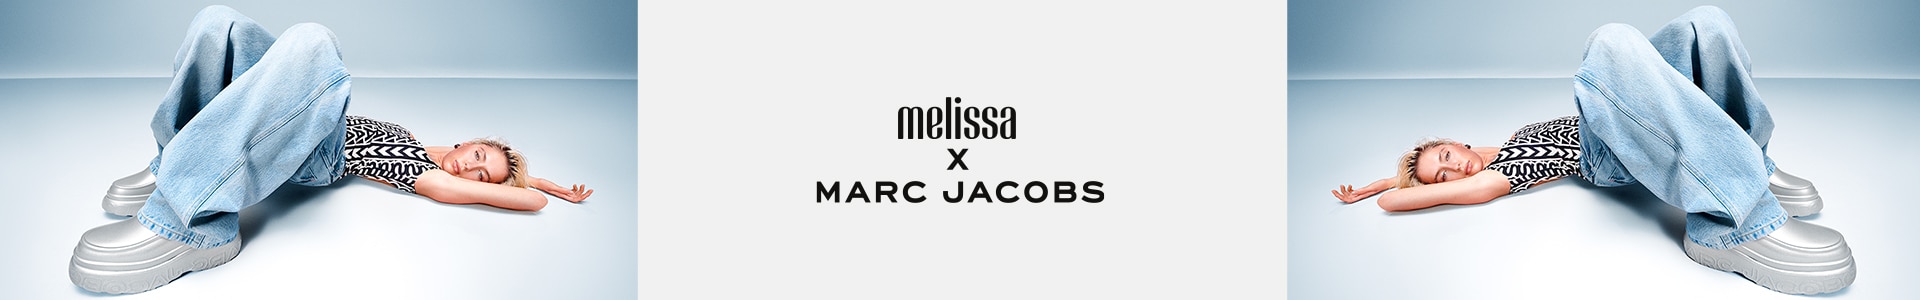 Melissa Collabs Marc Jacobs